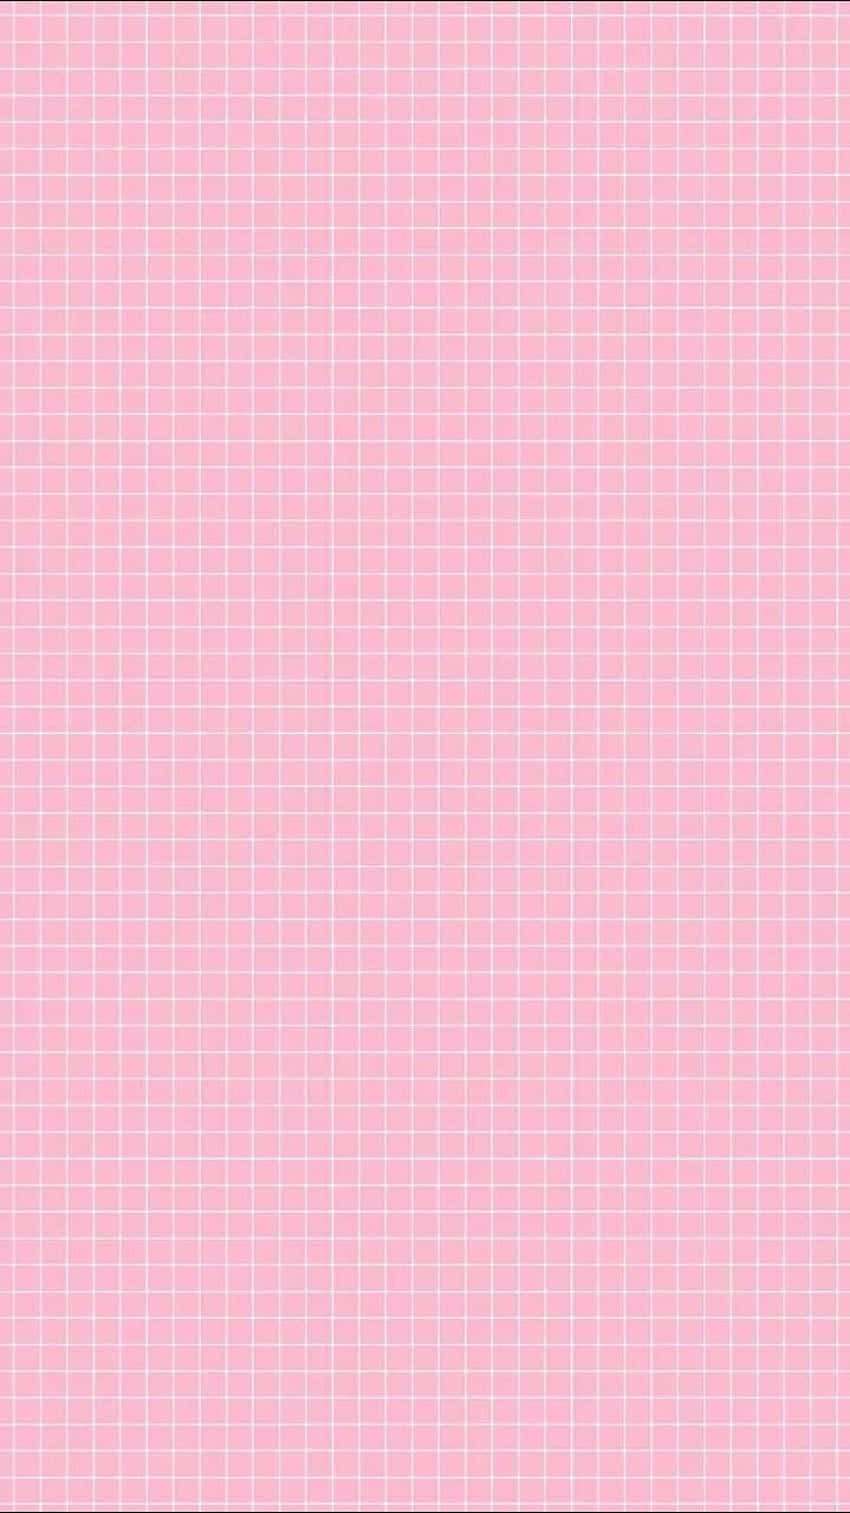 A Pink Paper With A Grid Pattern Wallpaper